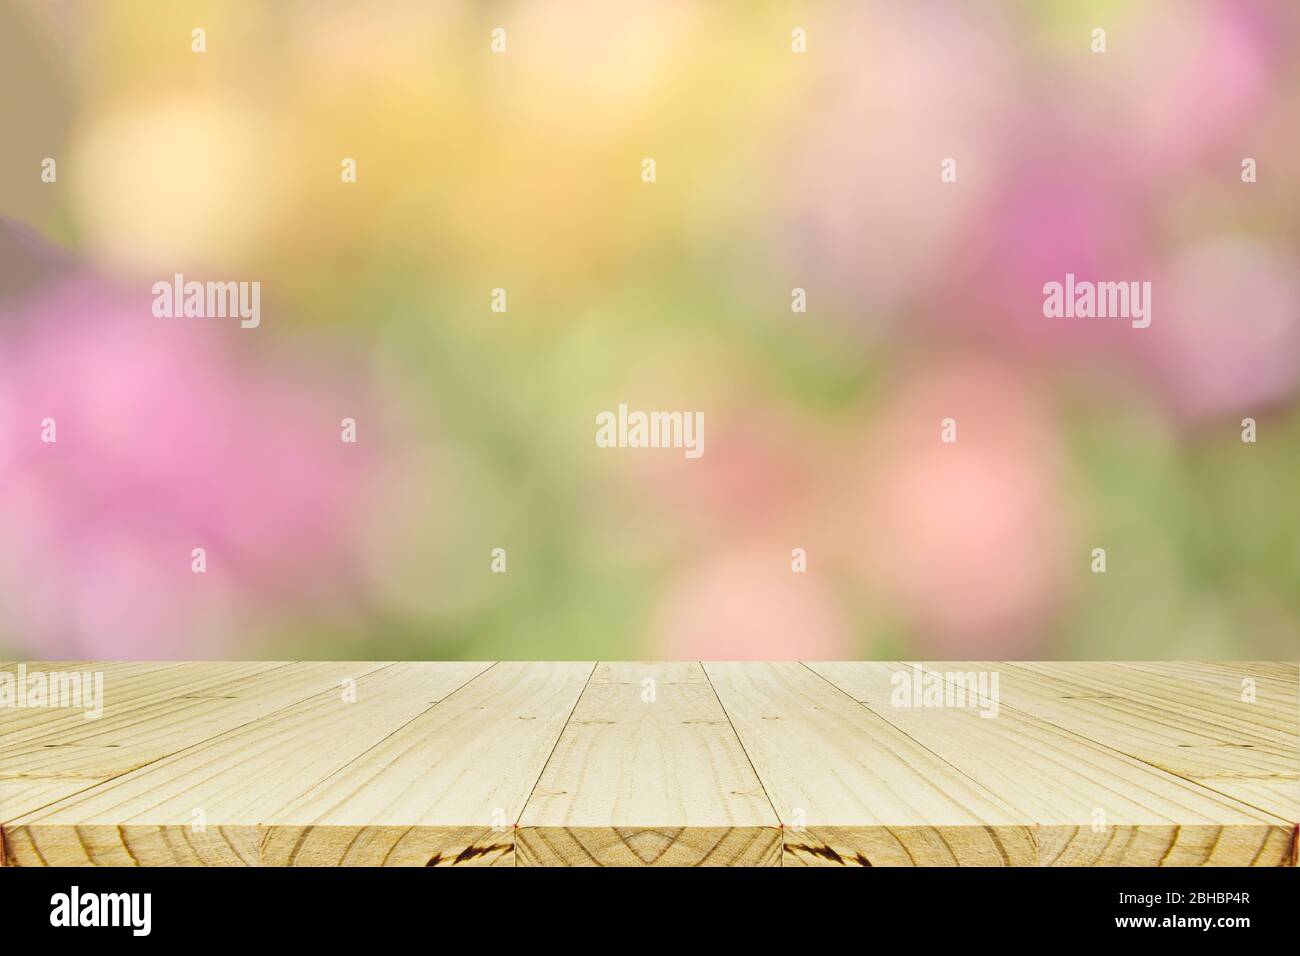 Perspective wood counter and abstract background with bokeh in pastel tone for spring, summer and blooming seasons. Stock Photo